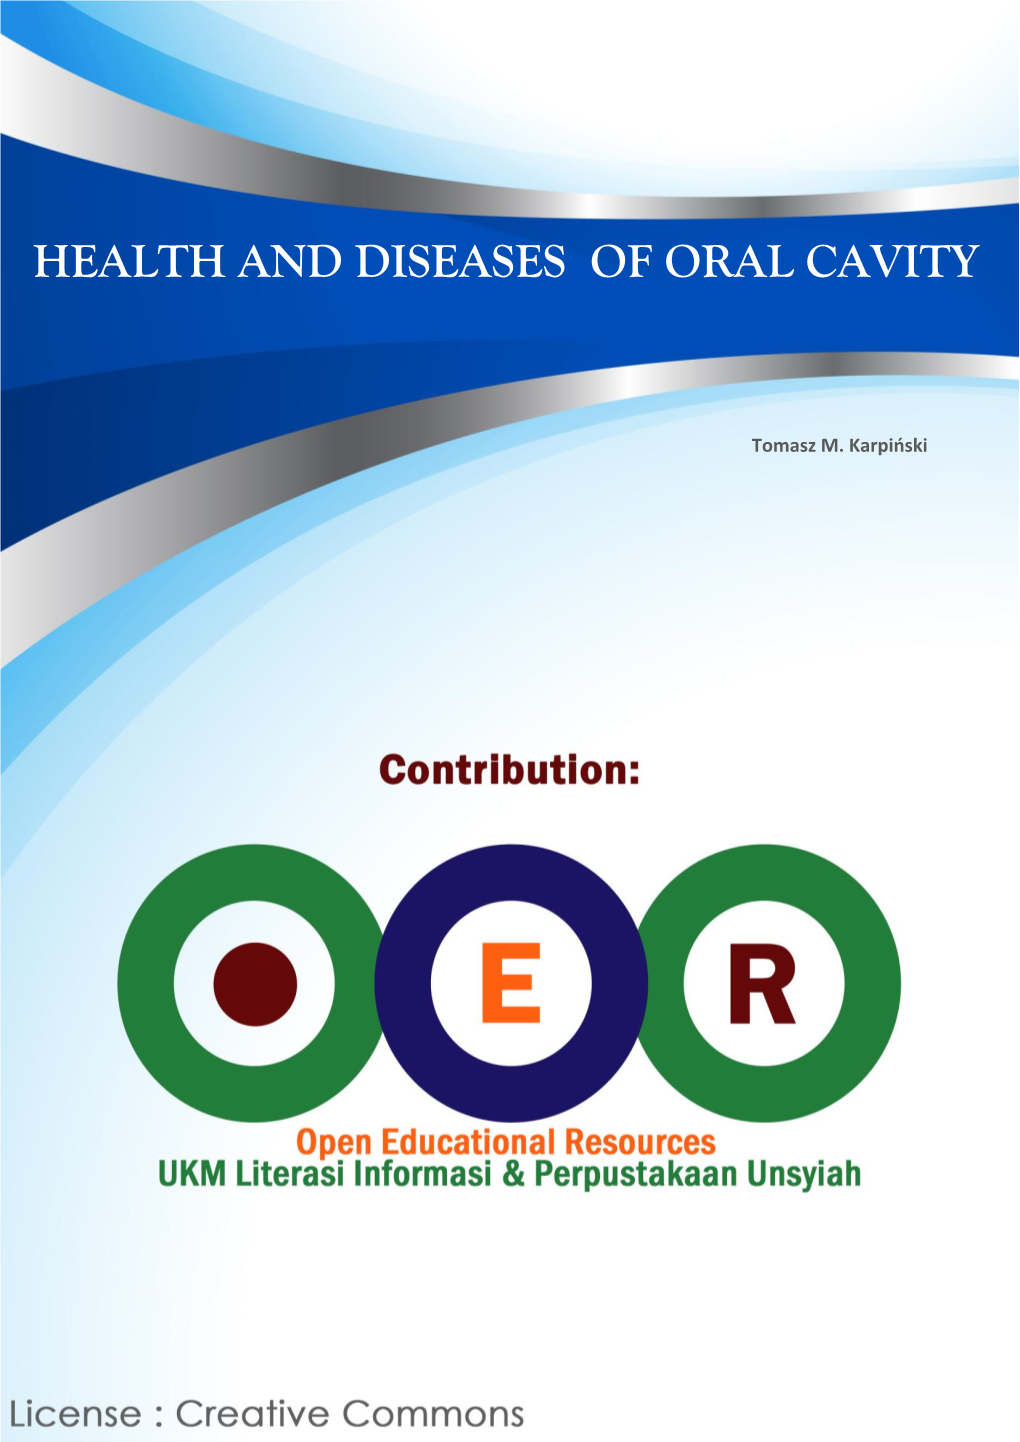 Health and Diseases of Oral Cavity